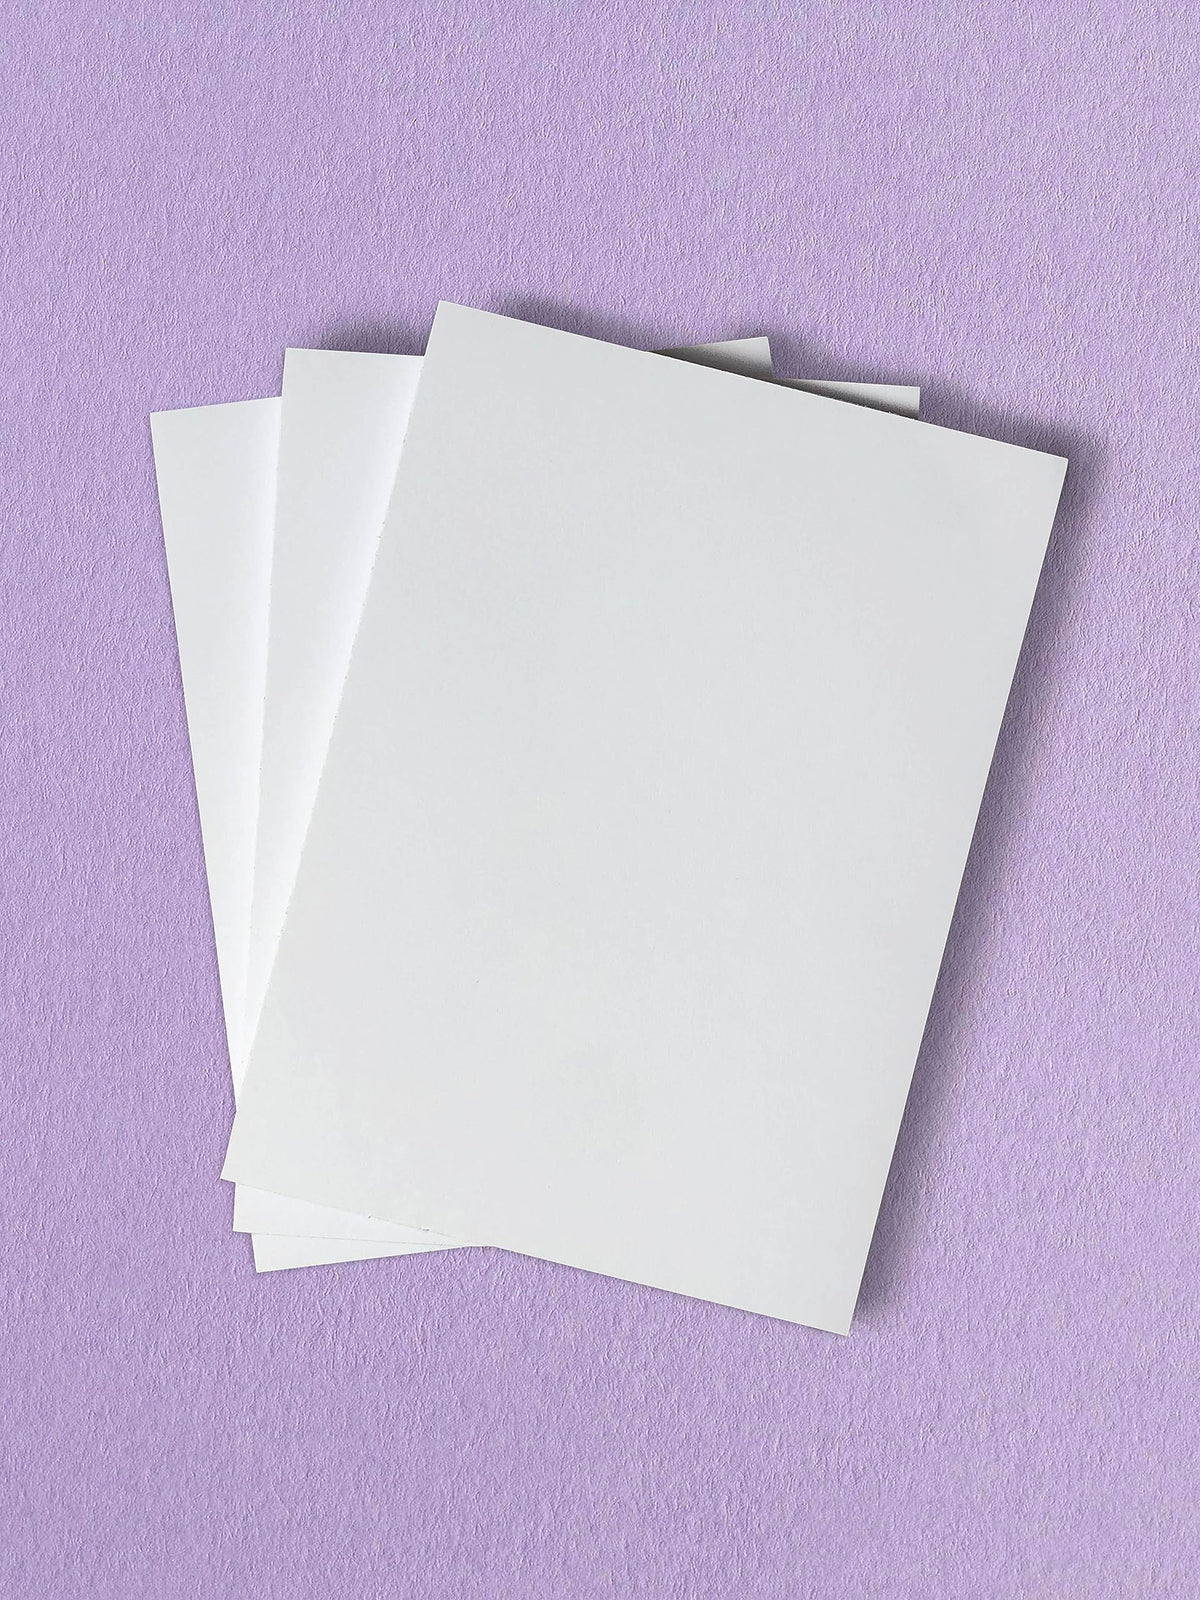 A5 Notepads - Three Pack - Quality 90gsm Plain Paper - Ideal Everyday Jotter Pads - 100 Pages/50 Sheets with strong Backing Board